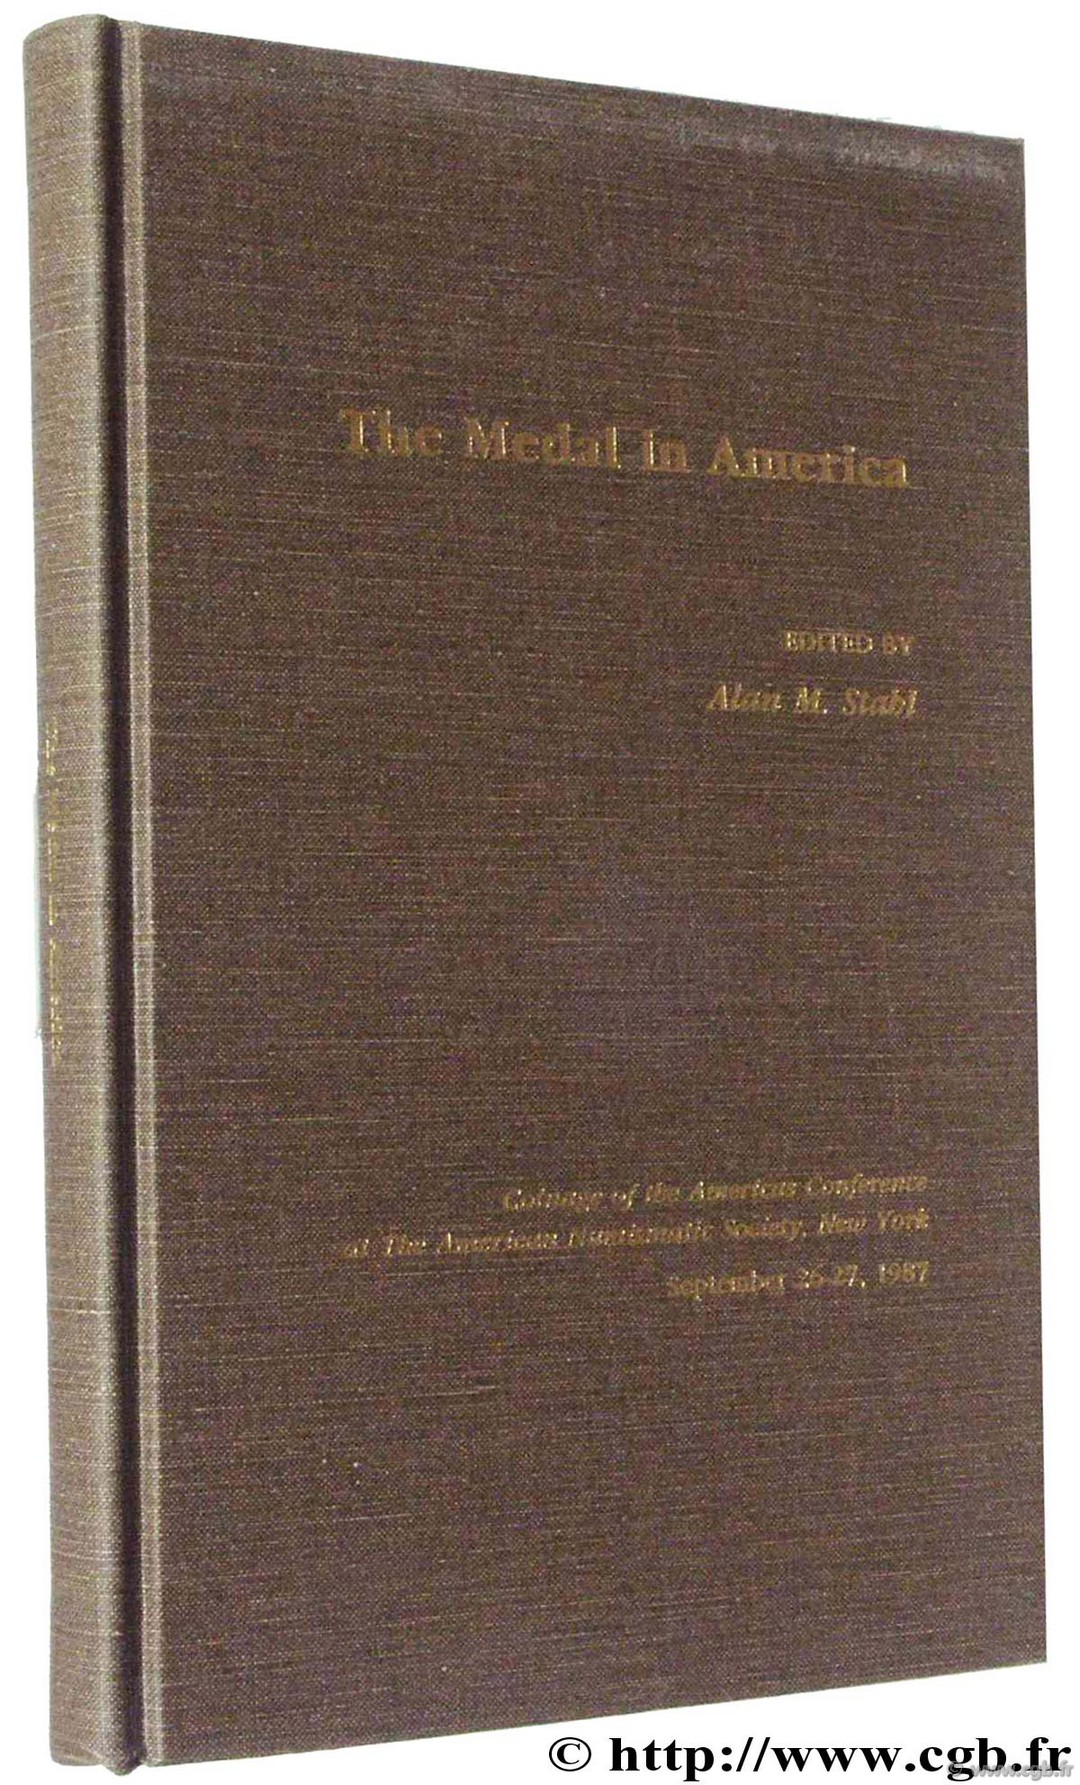 The Medal in America, Coinage of the Americas Conférence at the American Numismatic Society, New York September 26-27, 1987 